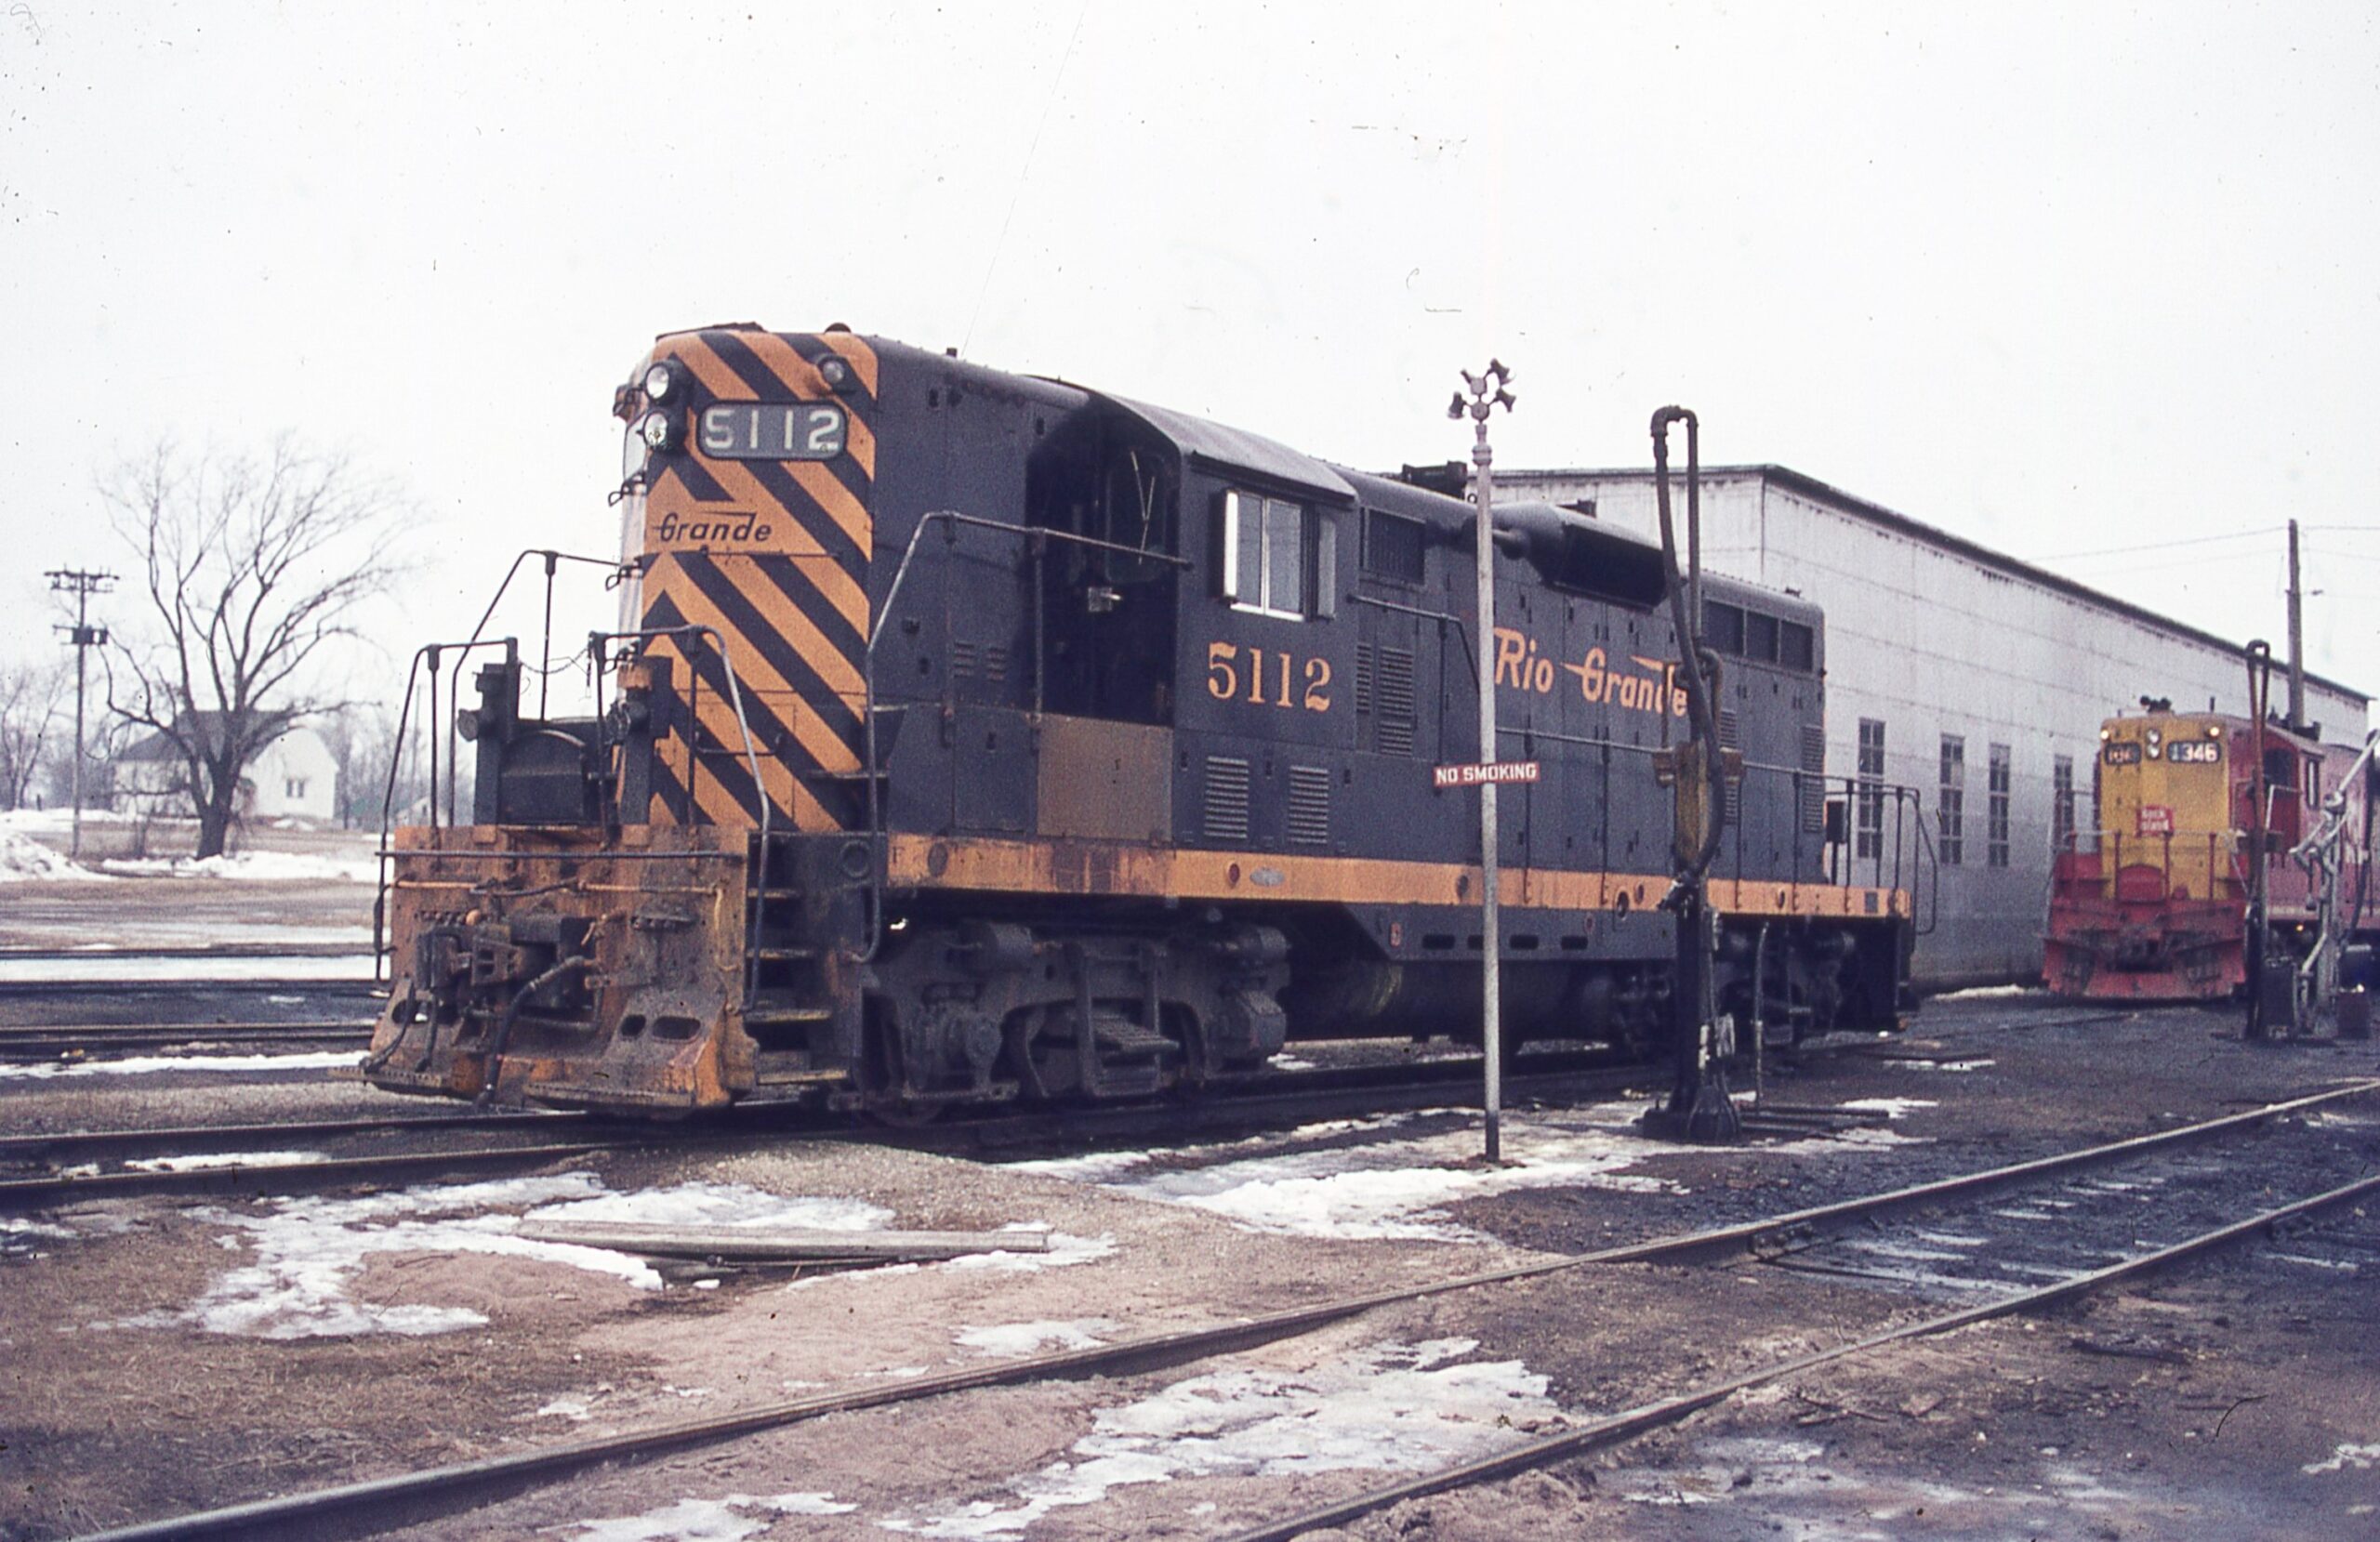 Denver and Rio Grande Western Railroad | Manly, Iowa | EMD GP9 #5112 | January 20, 1973 | Steven Timko Collection